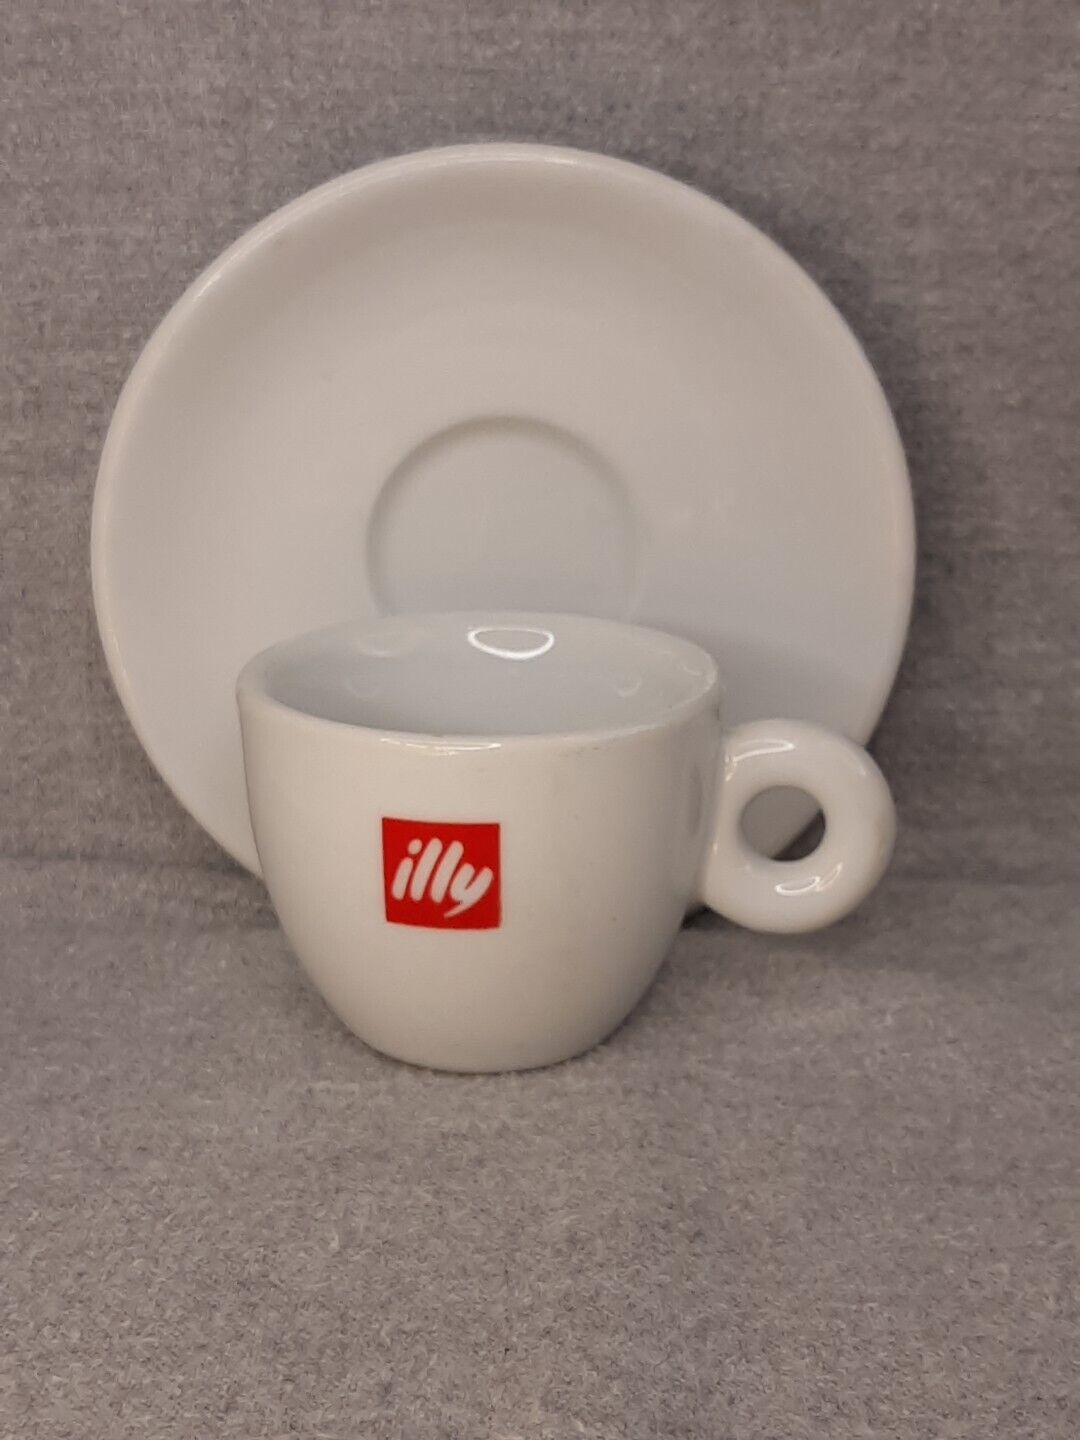 Illy Espresso Cup And Unmarked Saucer, Heavy Surface Wear